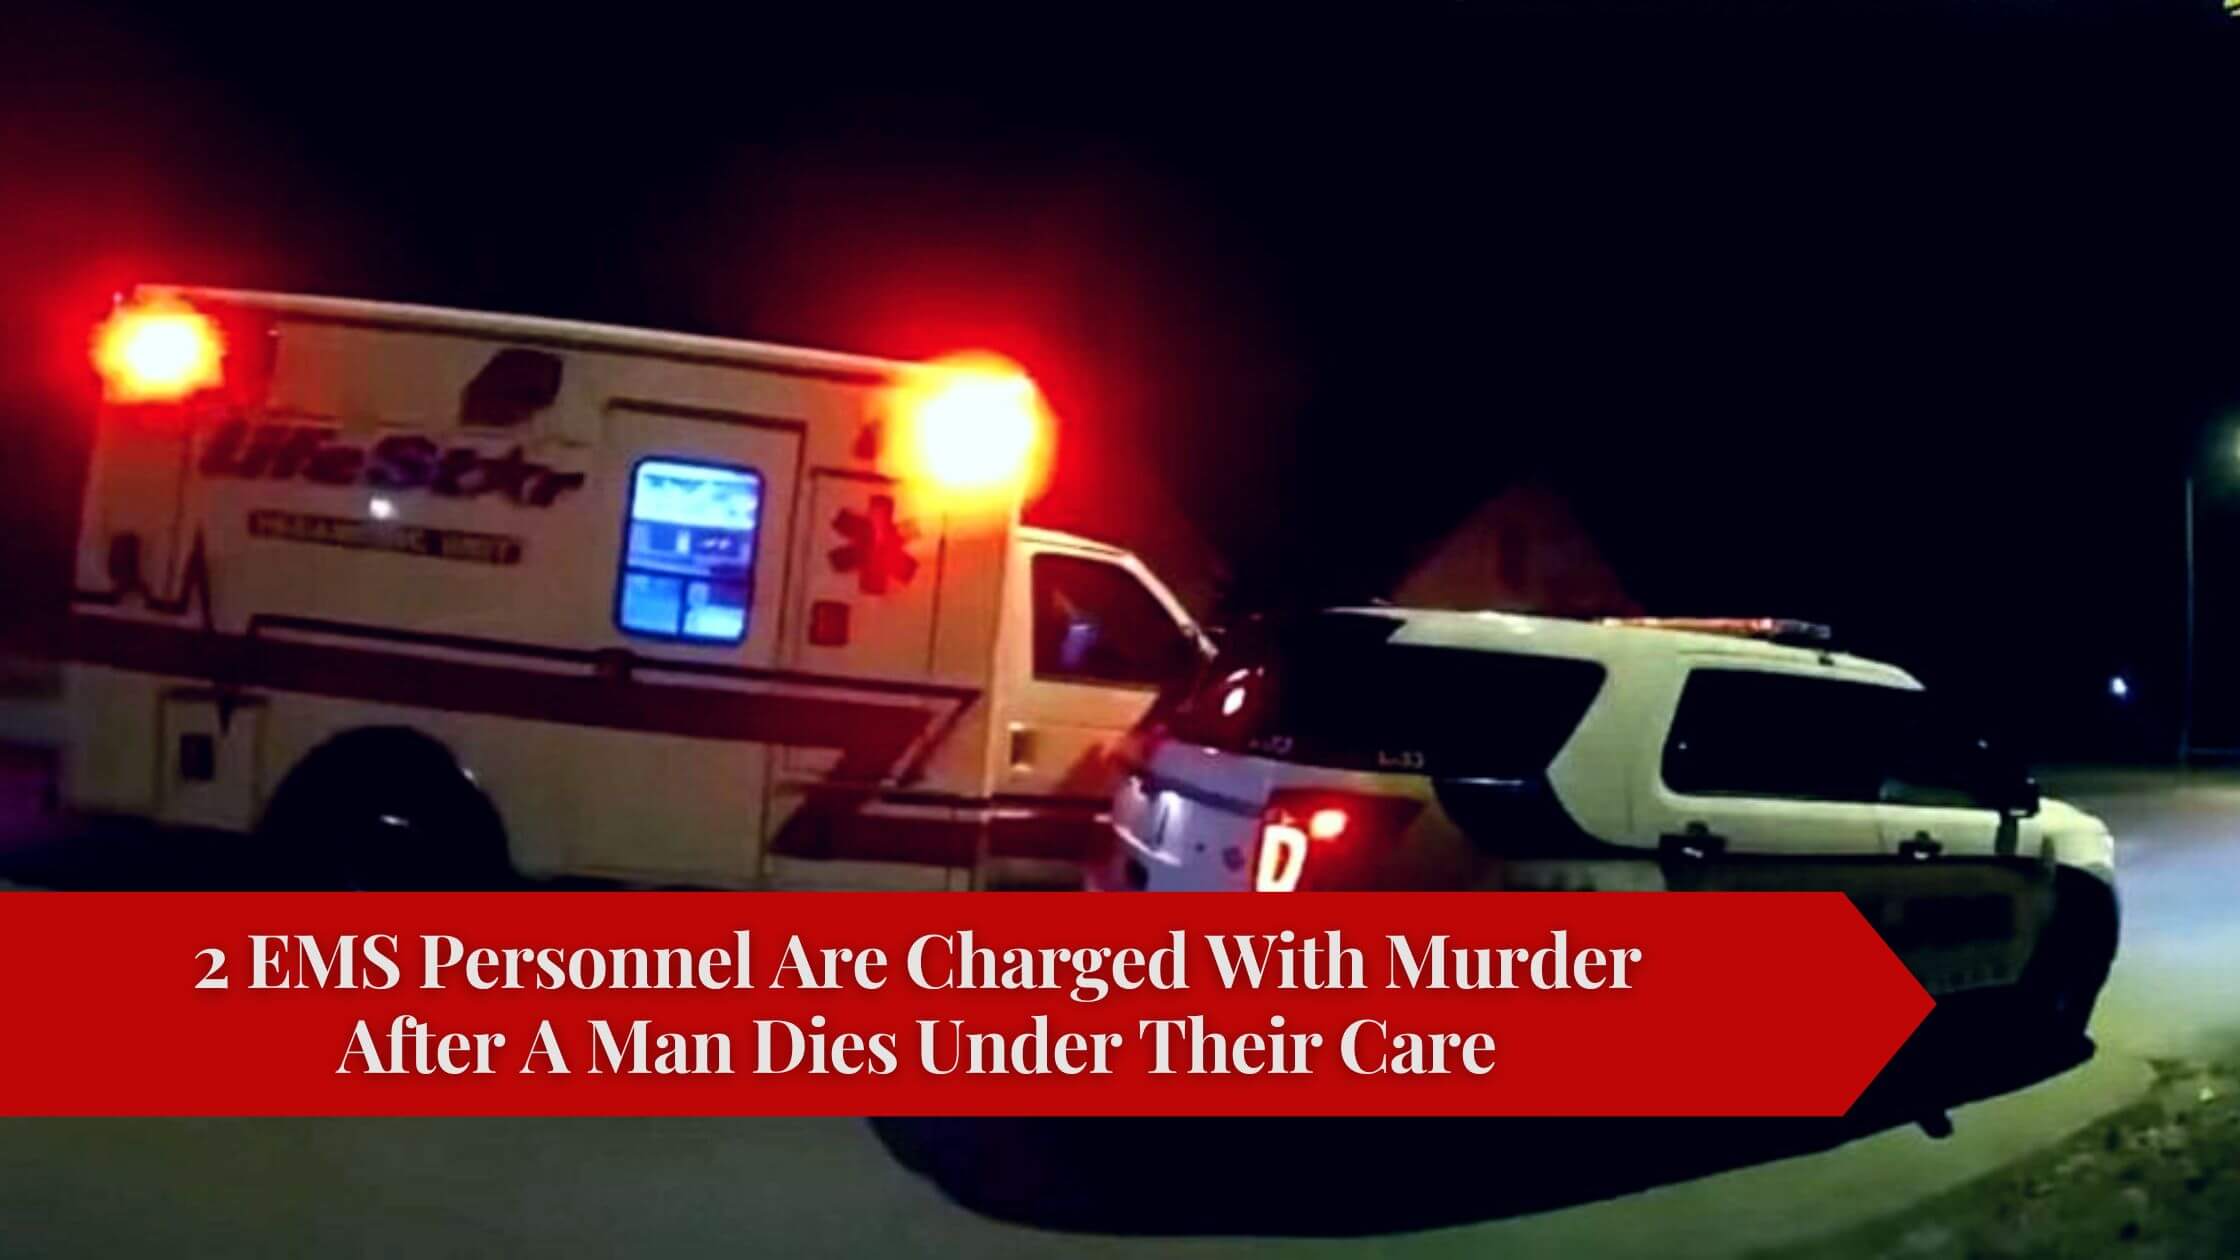 2 EMS Personnel Are Charged With Murder After A Man Dies Under Their Care